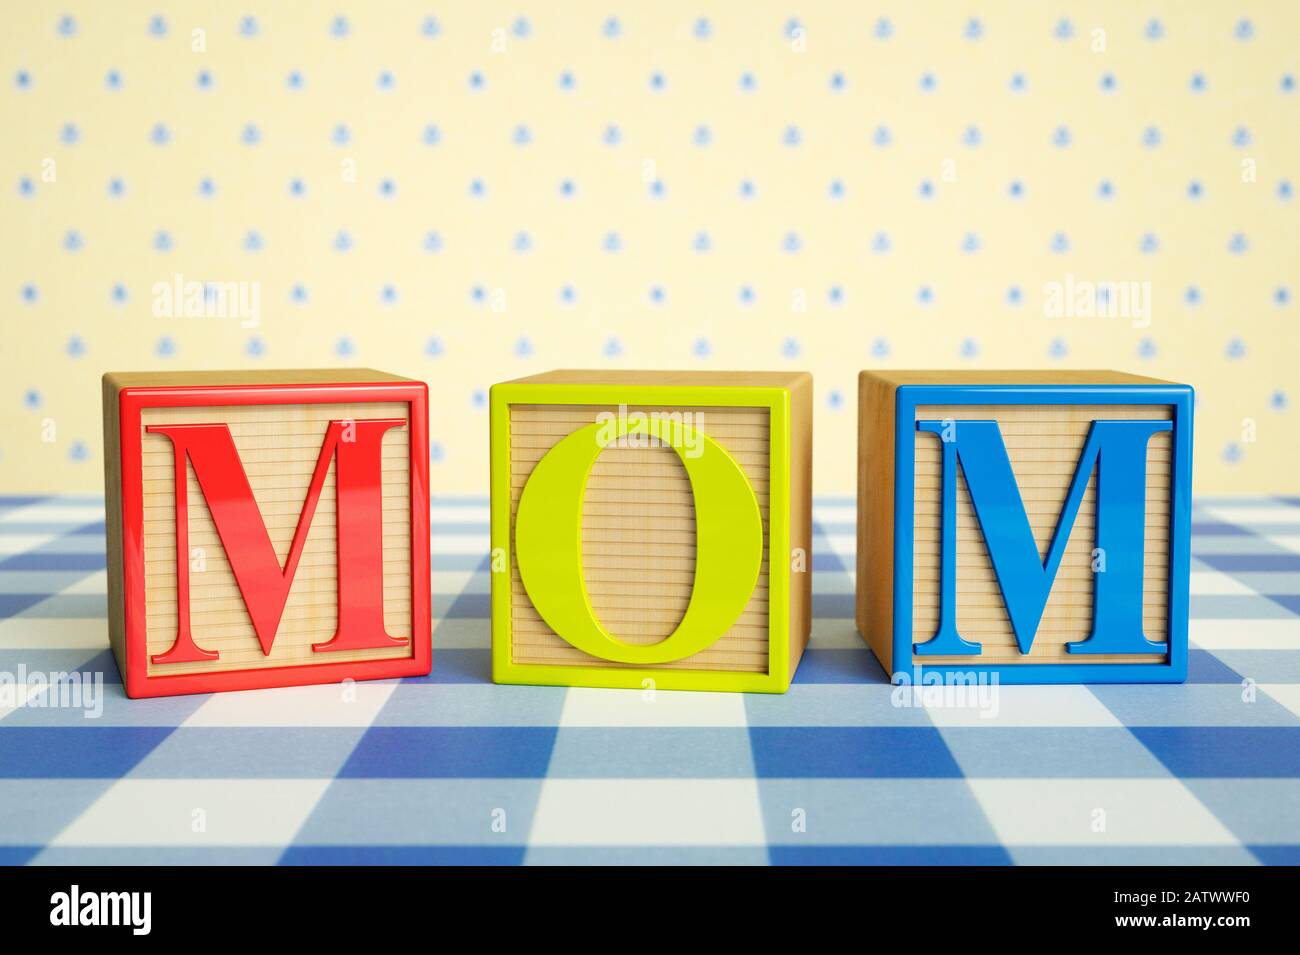 Childrens wooden ABC blocks spelling MOM on a checked tablecloth Stock Photo